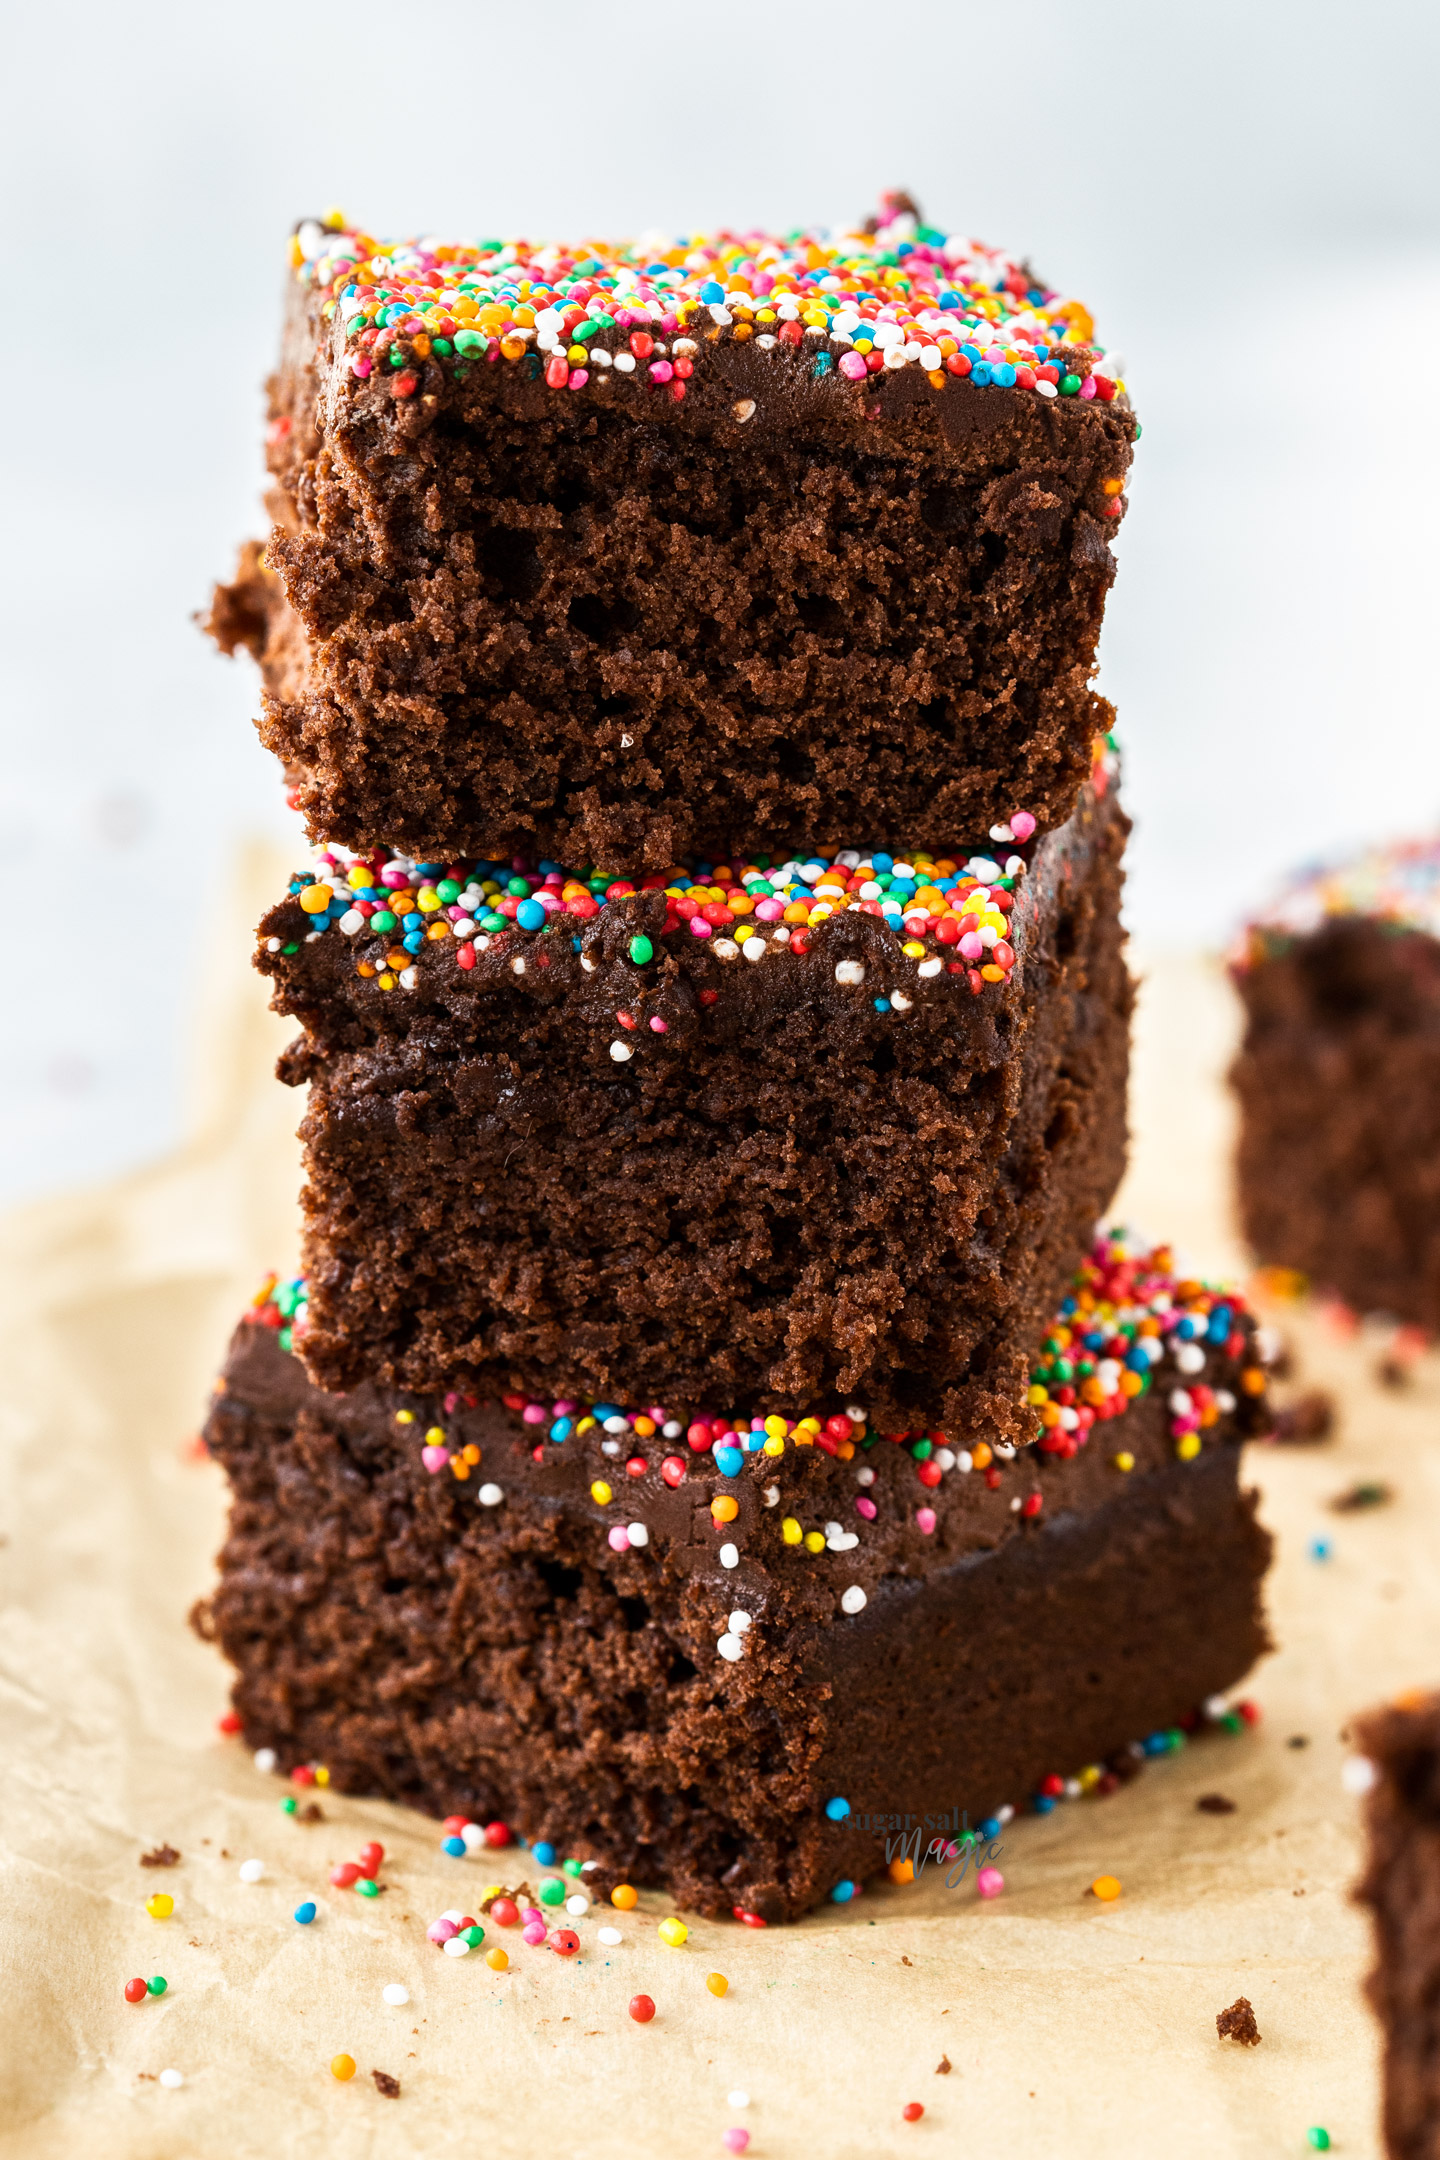 A stack of 3 pieces of chocolate cake.